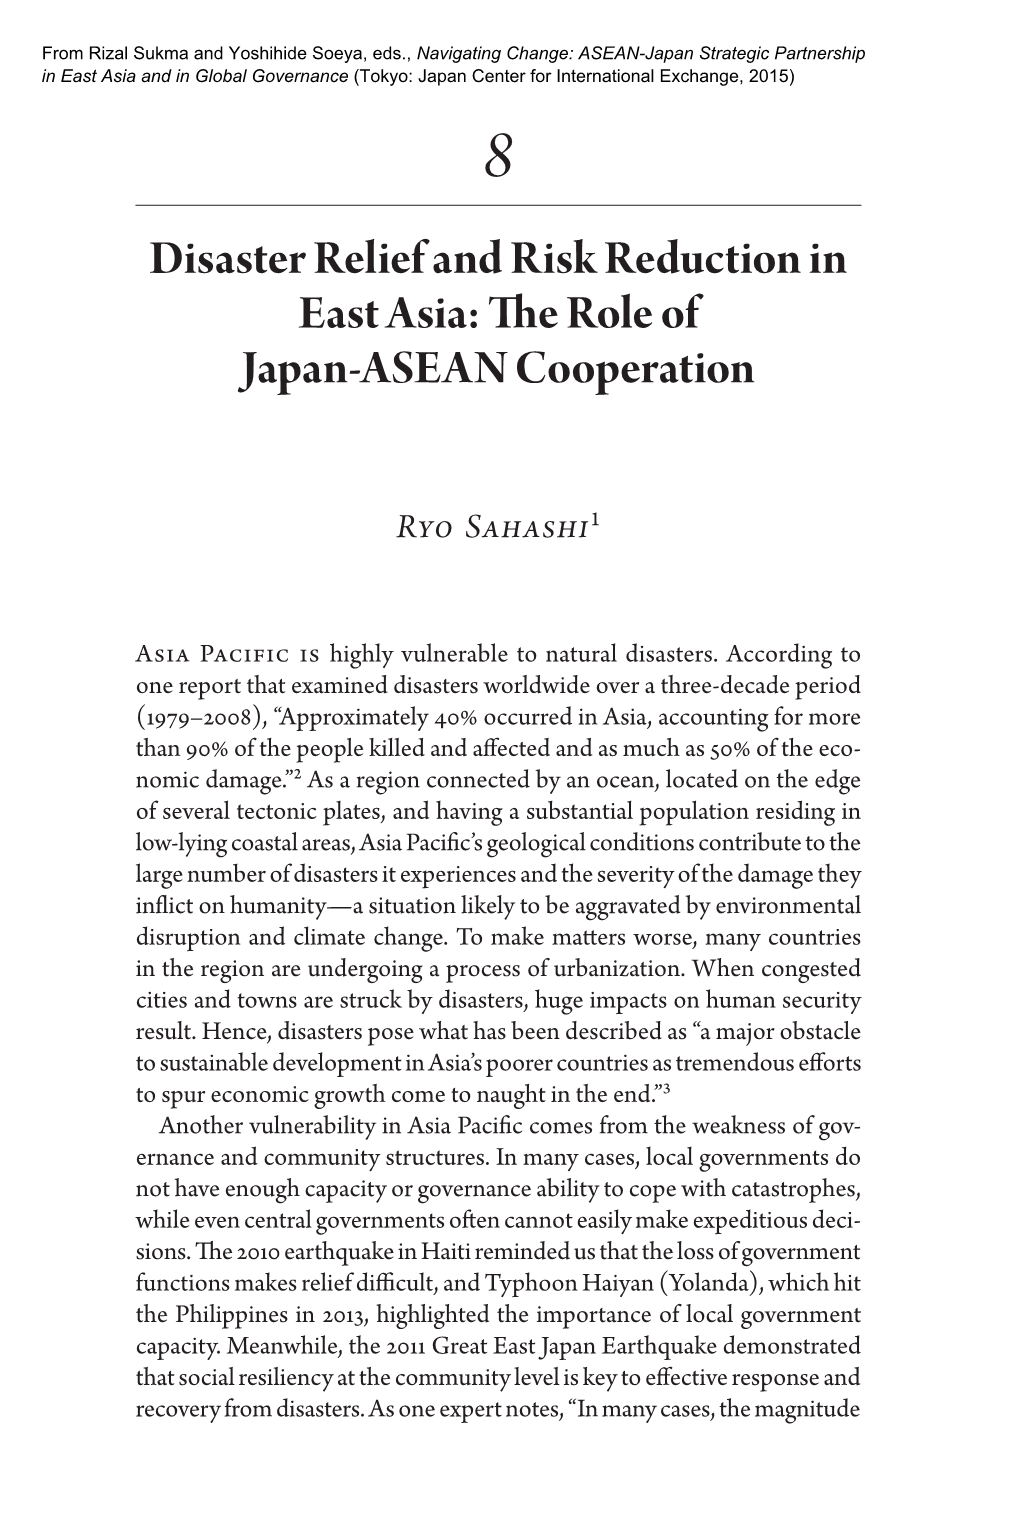 Disaster Relief and Risk Reduction in East Asia: the Role of Japan-ASEAN Cooperation